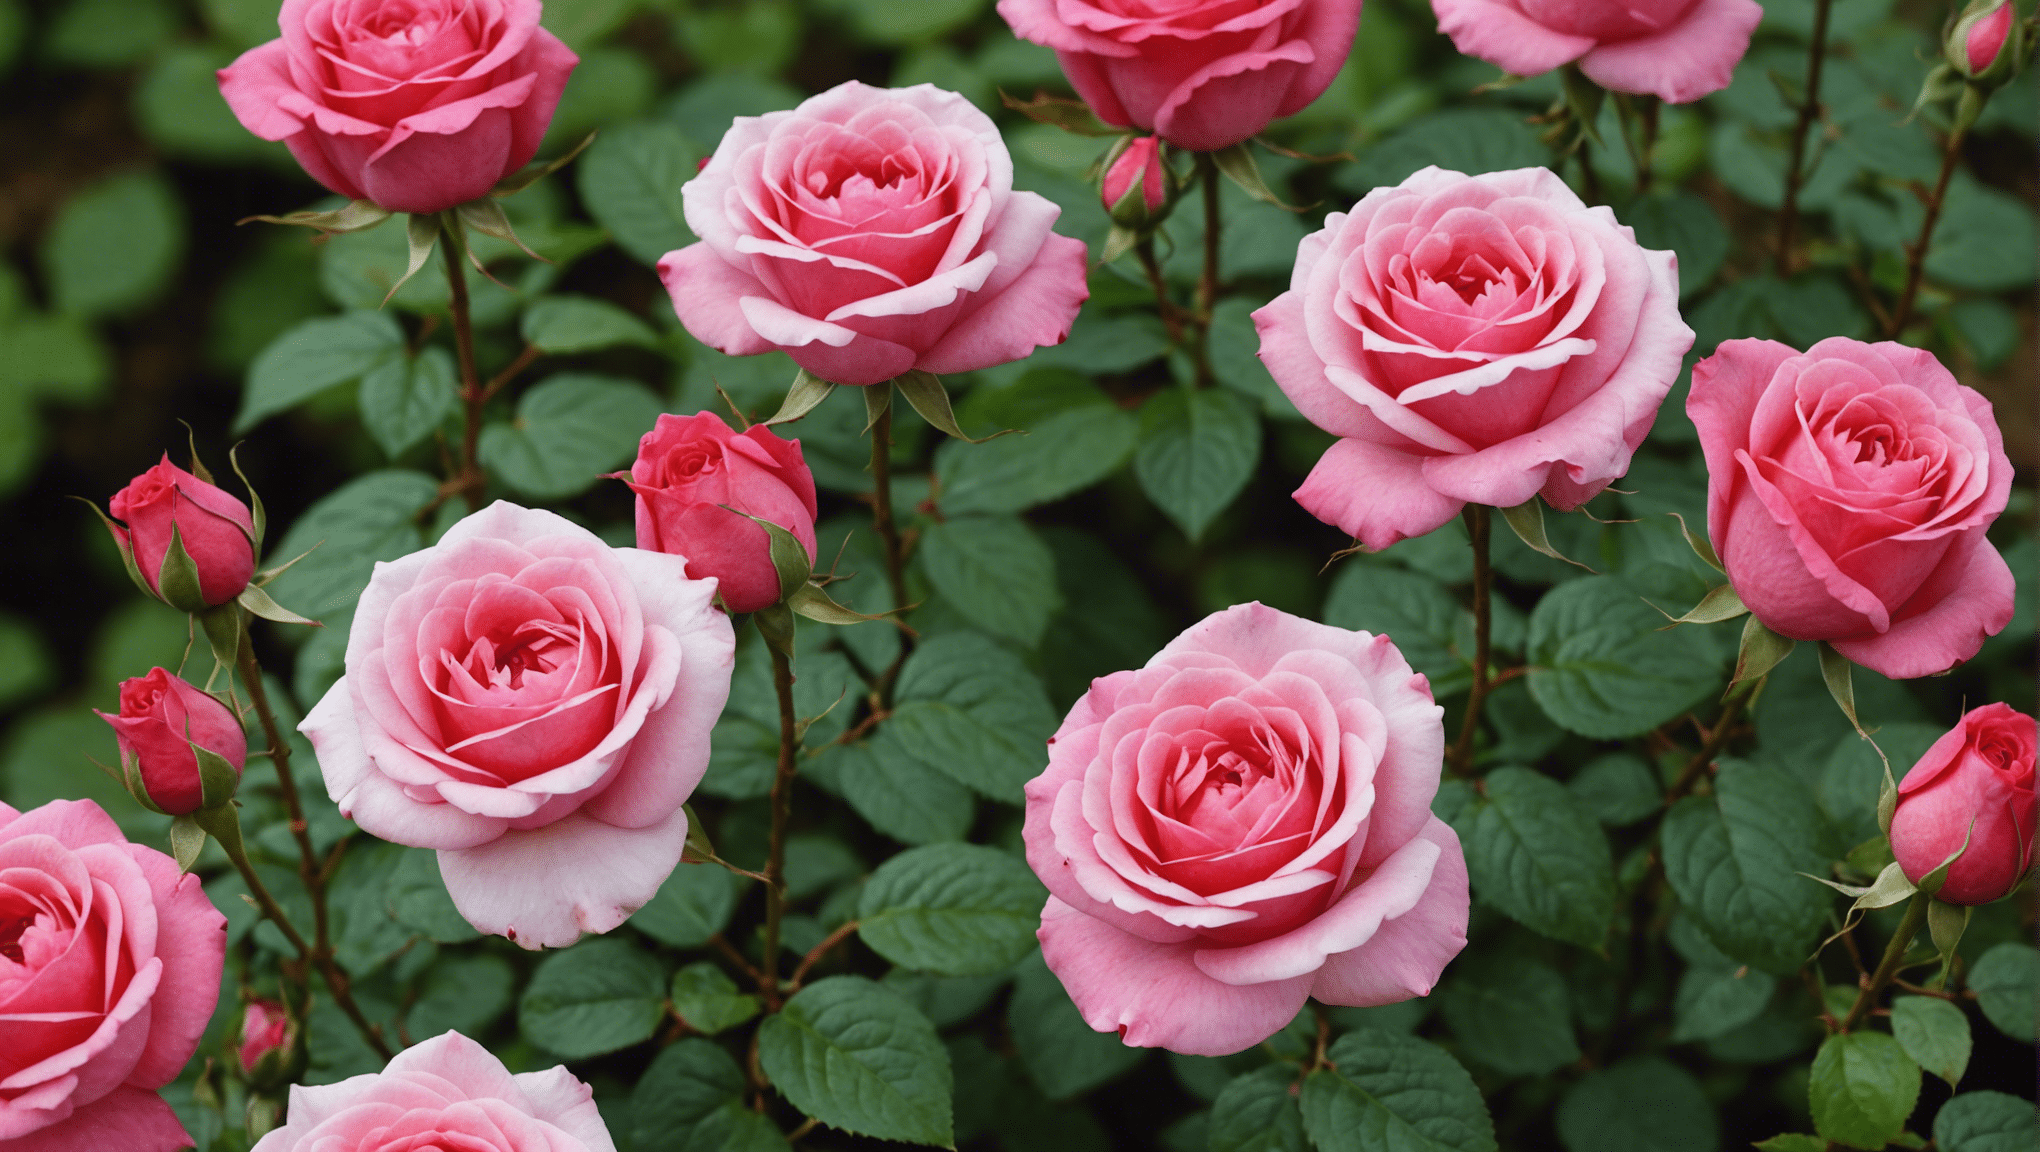 discover how to grow rose seeds with our easy-to-follow guide. learn the best methods for cultivating beautiful rose plants from seeds.